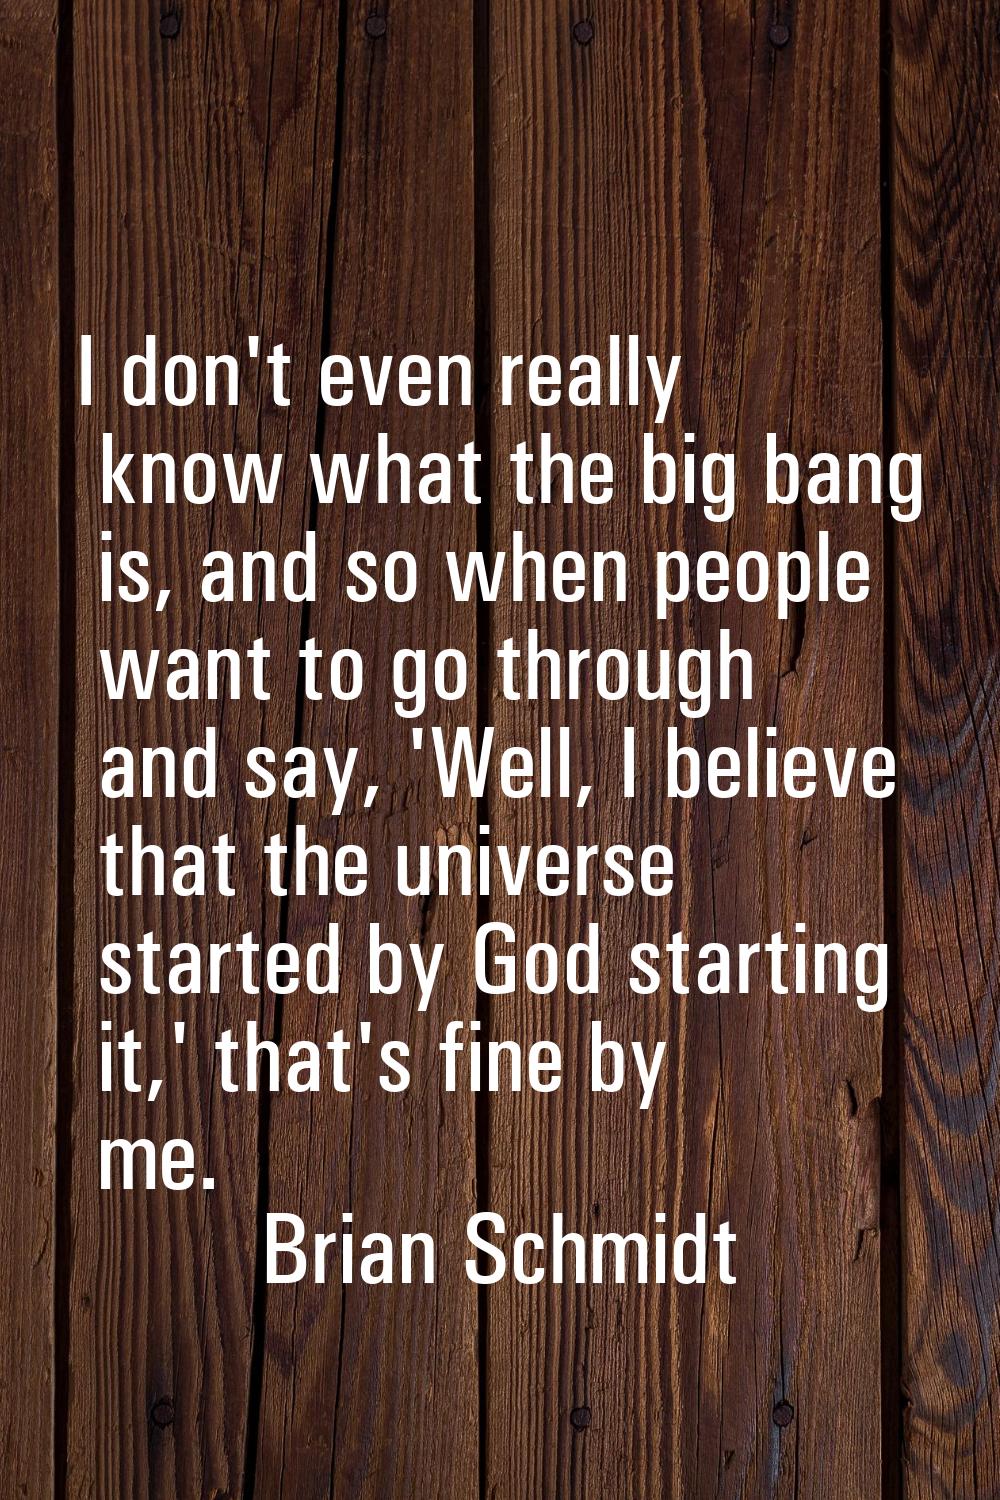 I don't even really know what the big bang is, and so when people want to go through and say, 'Well